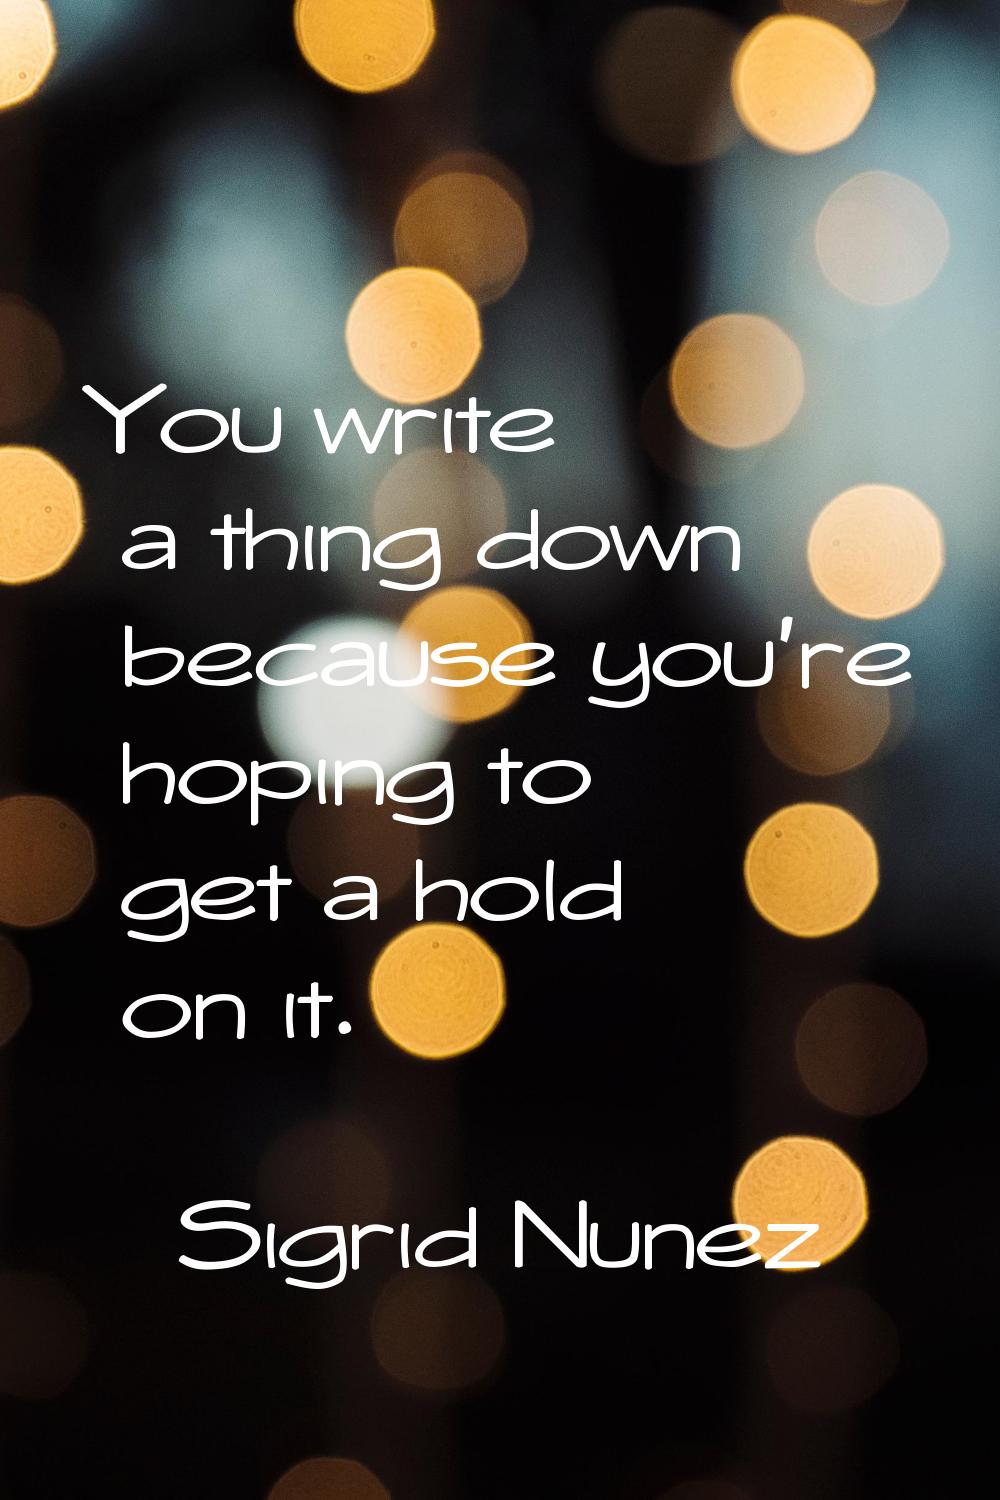 You write a thing down because you're hoping to get a hold on it.